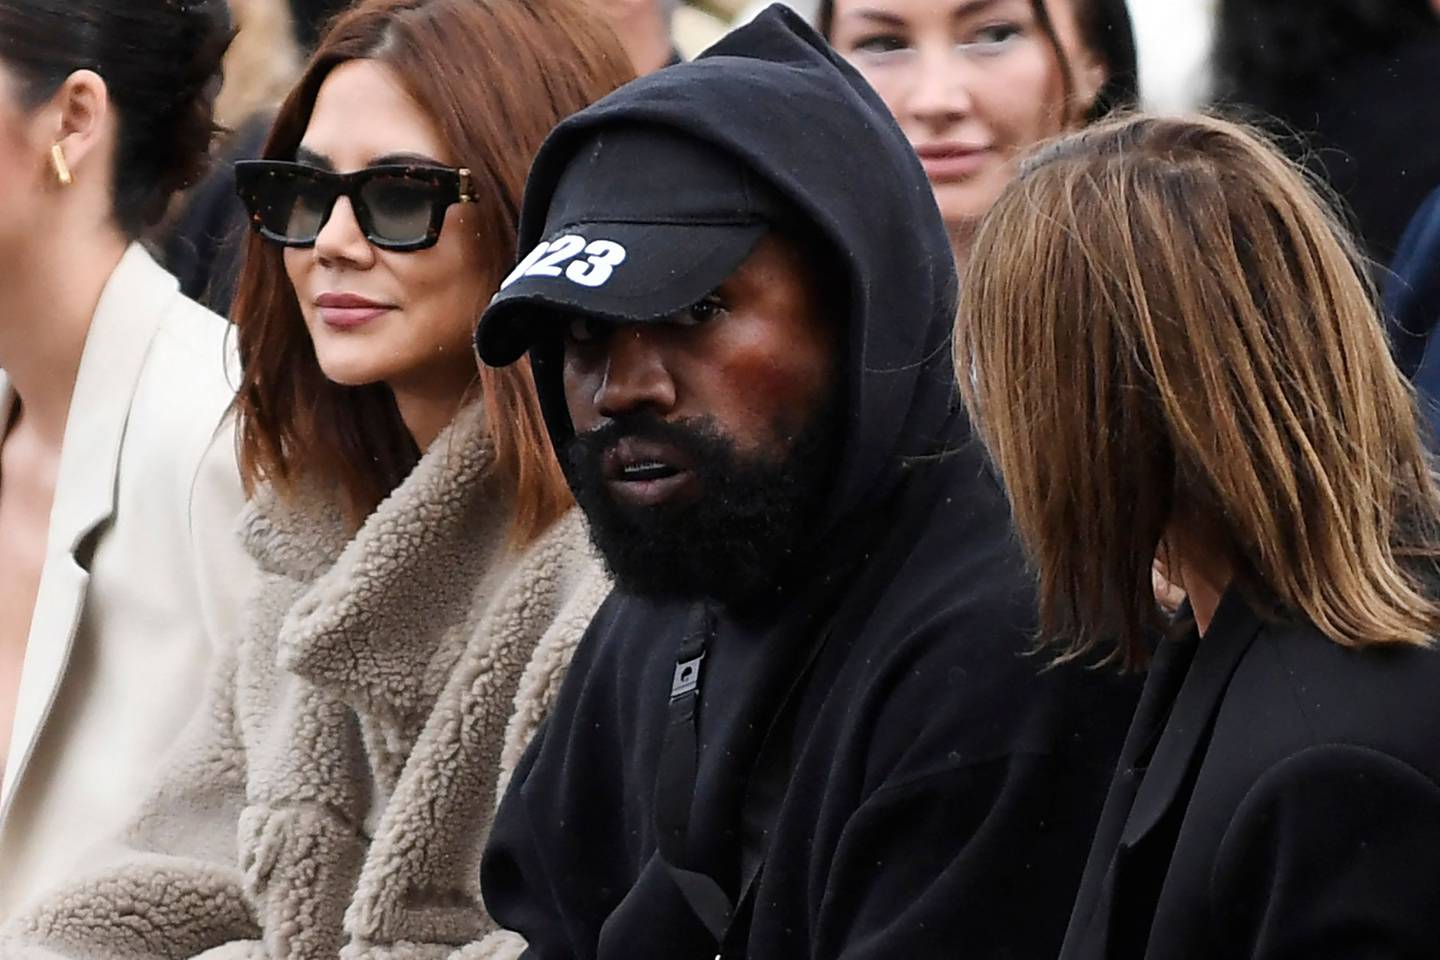 Ye at the Givenchy spring/summer 2023 fashion show during the Paris Womenswear Fashion Week in October. AFP